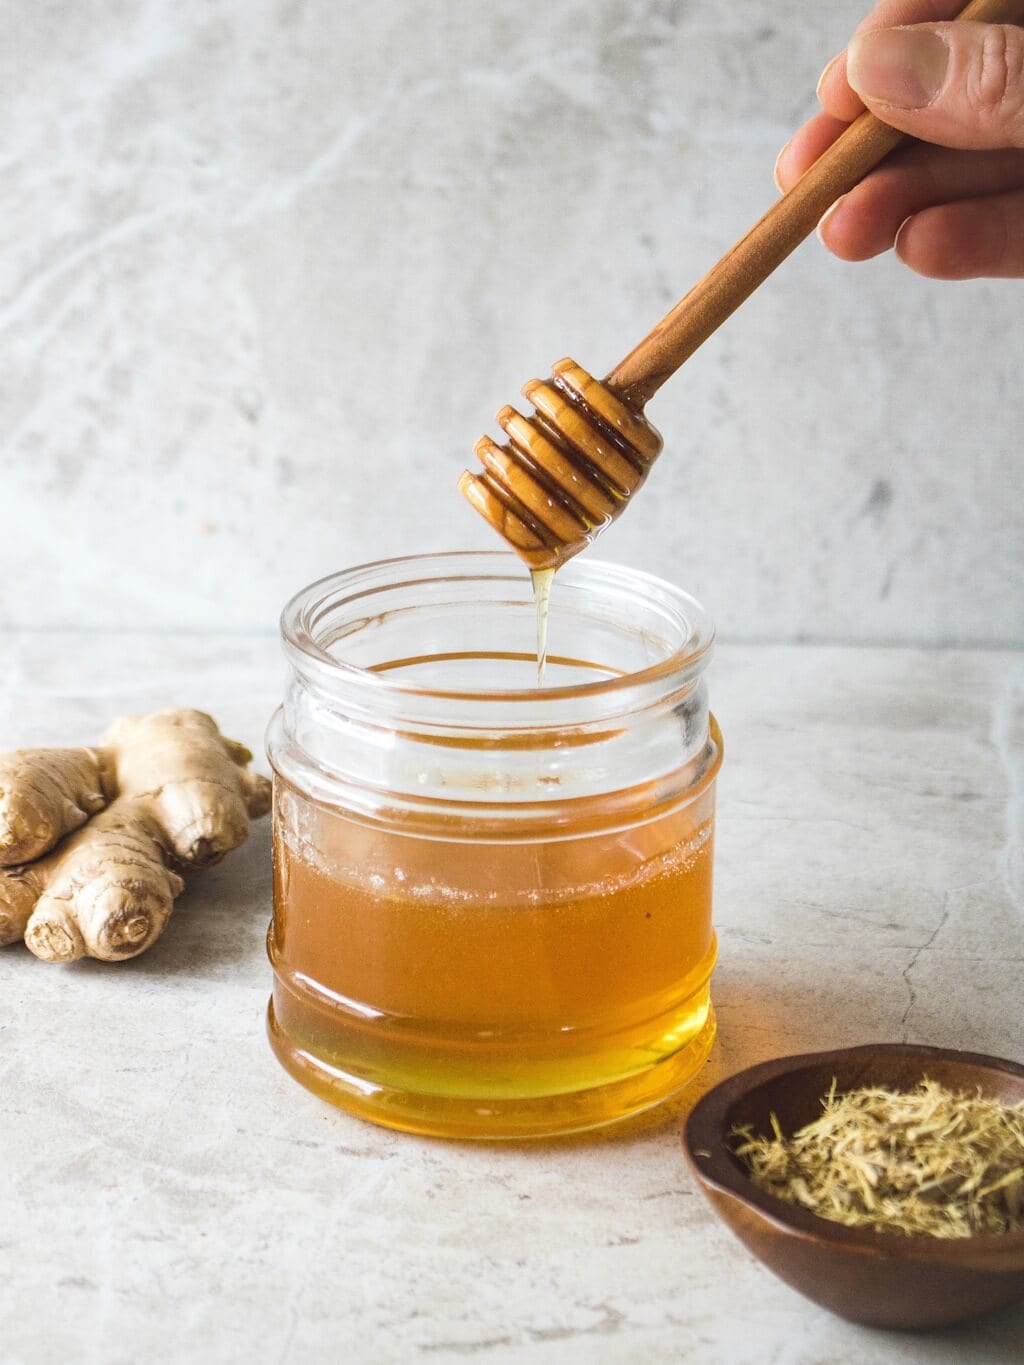 How to Make Ginger Licorice Infused Honey Recipe